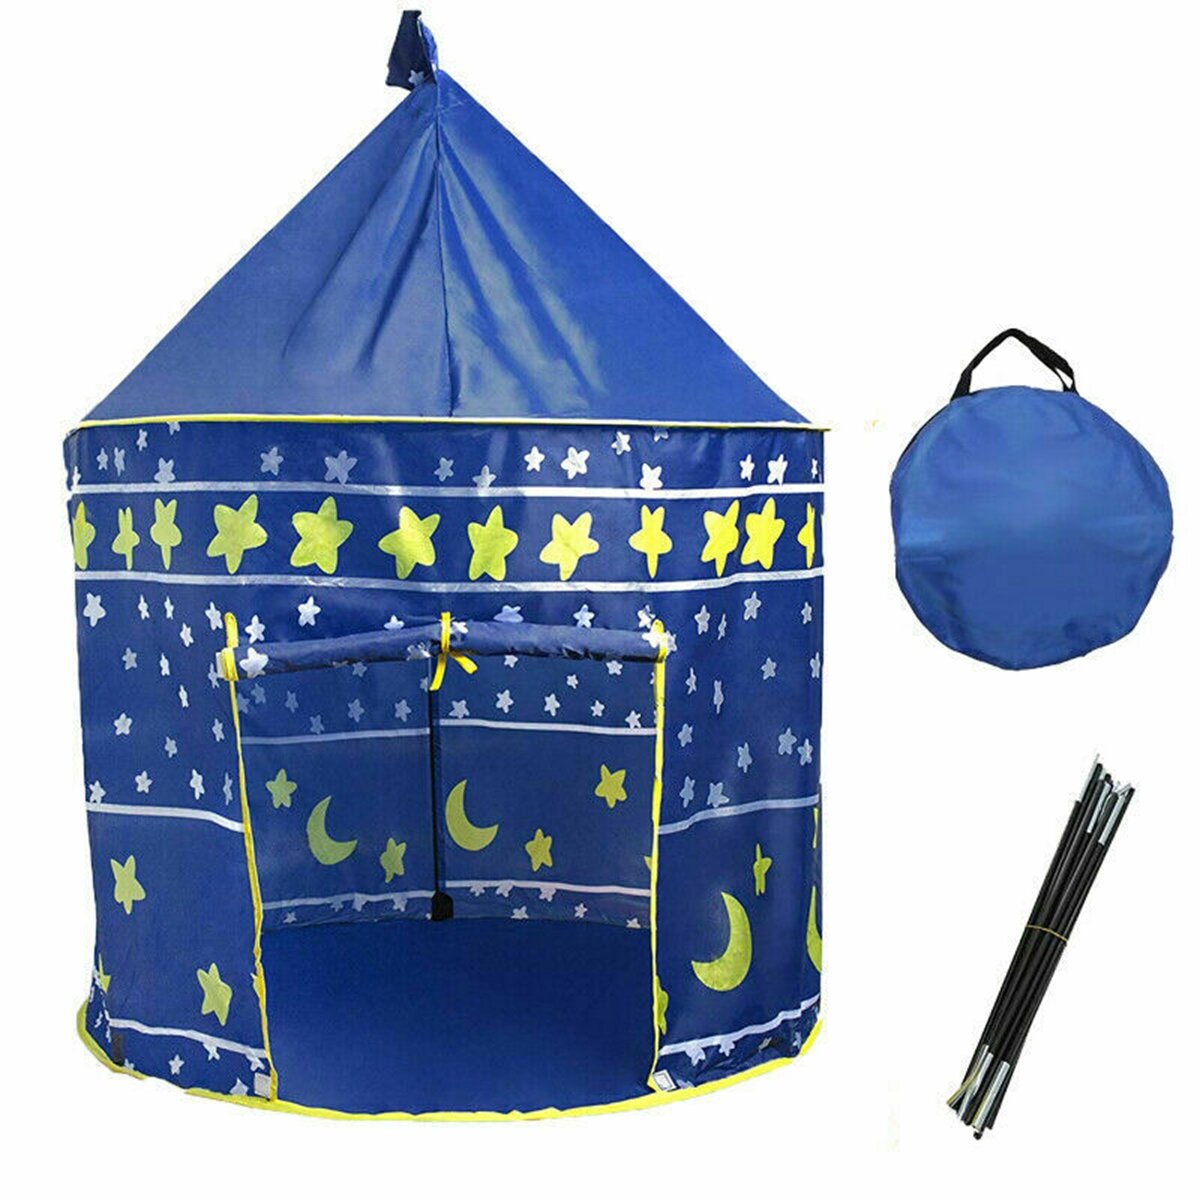 best price,kids,playhouse,moon,stars,pattern,play,tent,discount